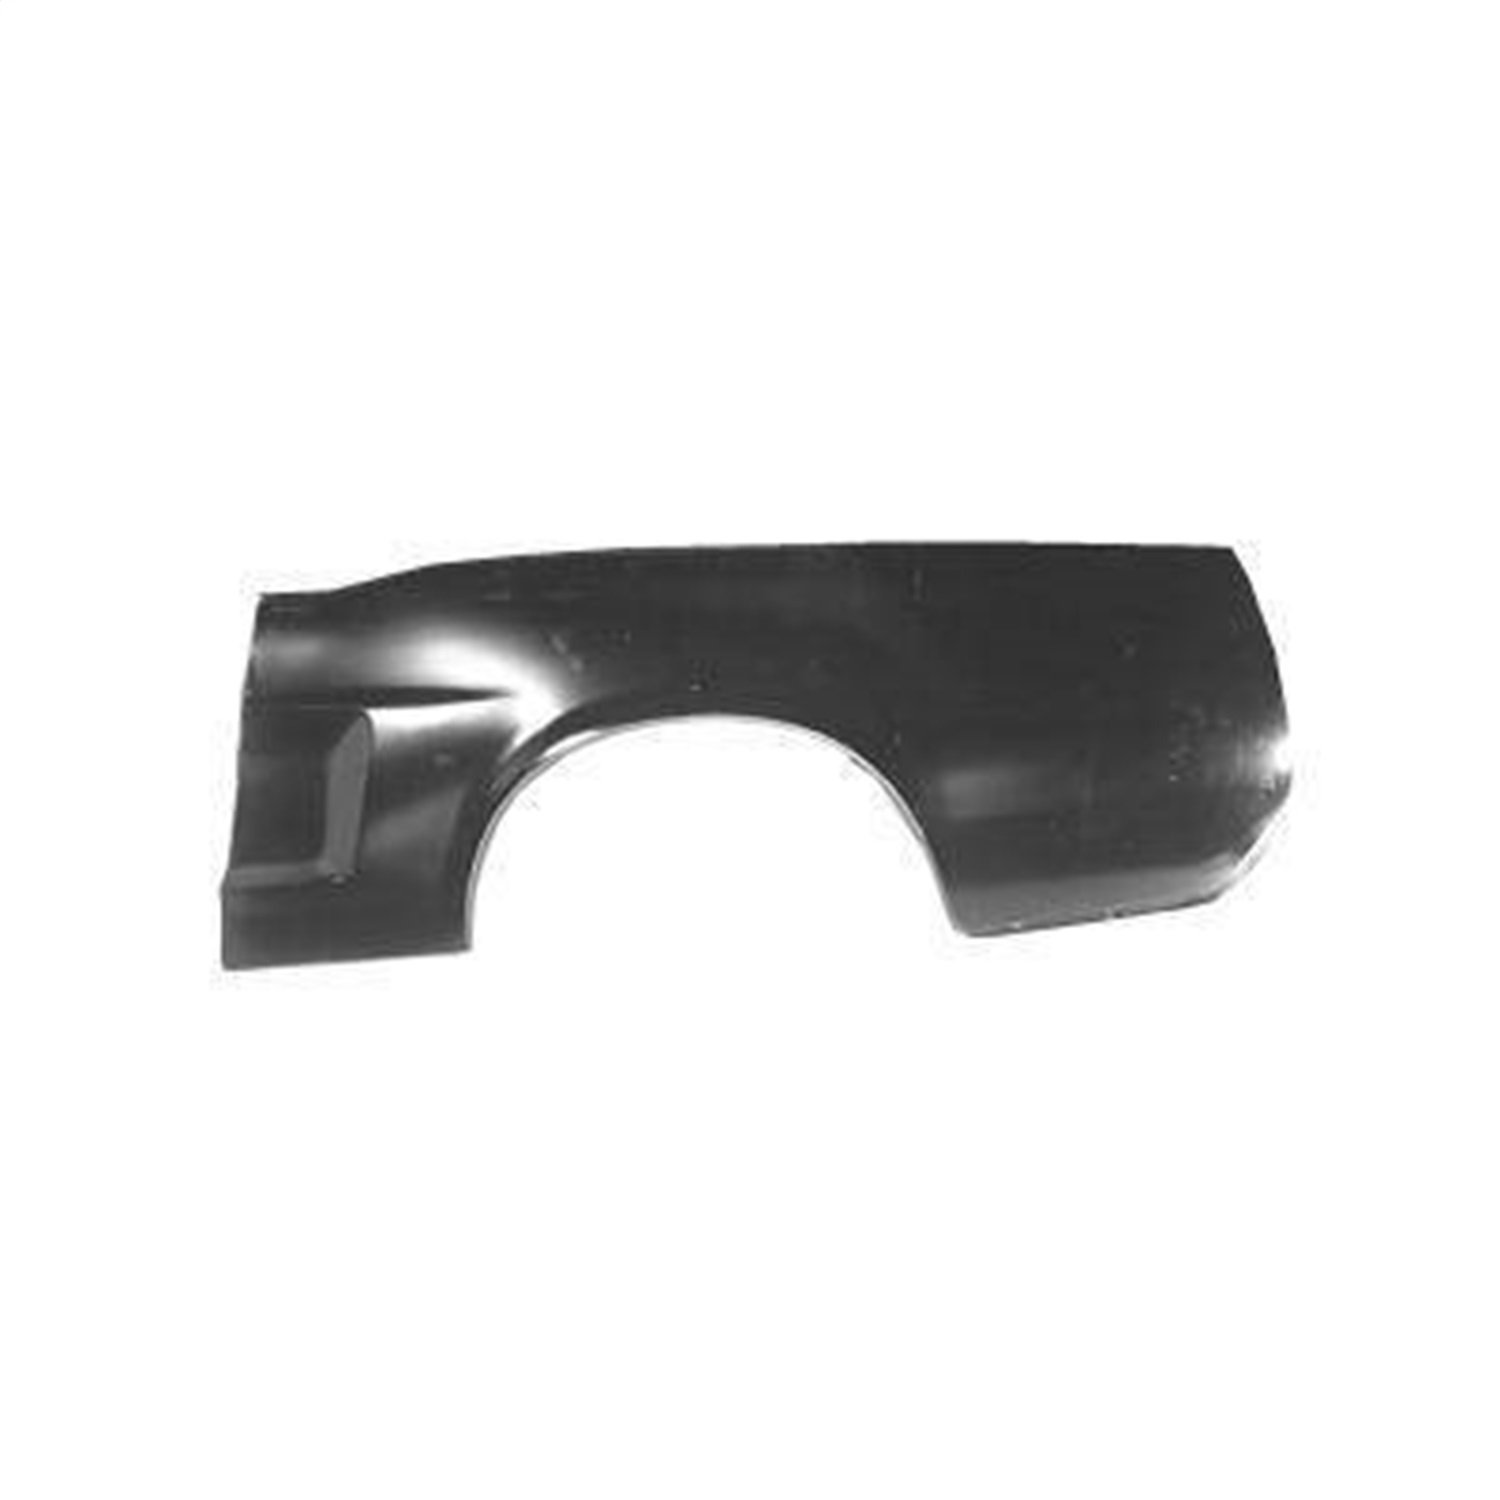 Quarter Panel Skin 1971-1973 Ford Mustang Coupe &